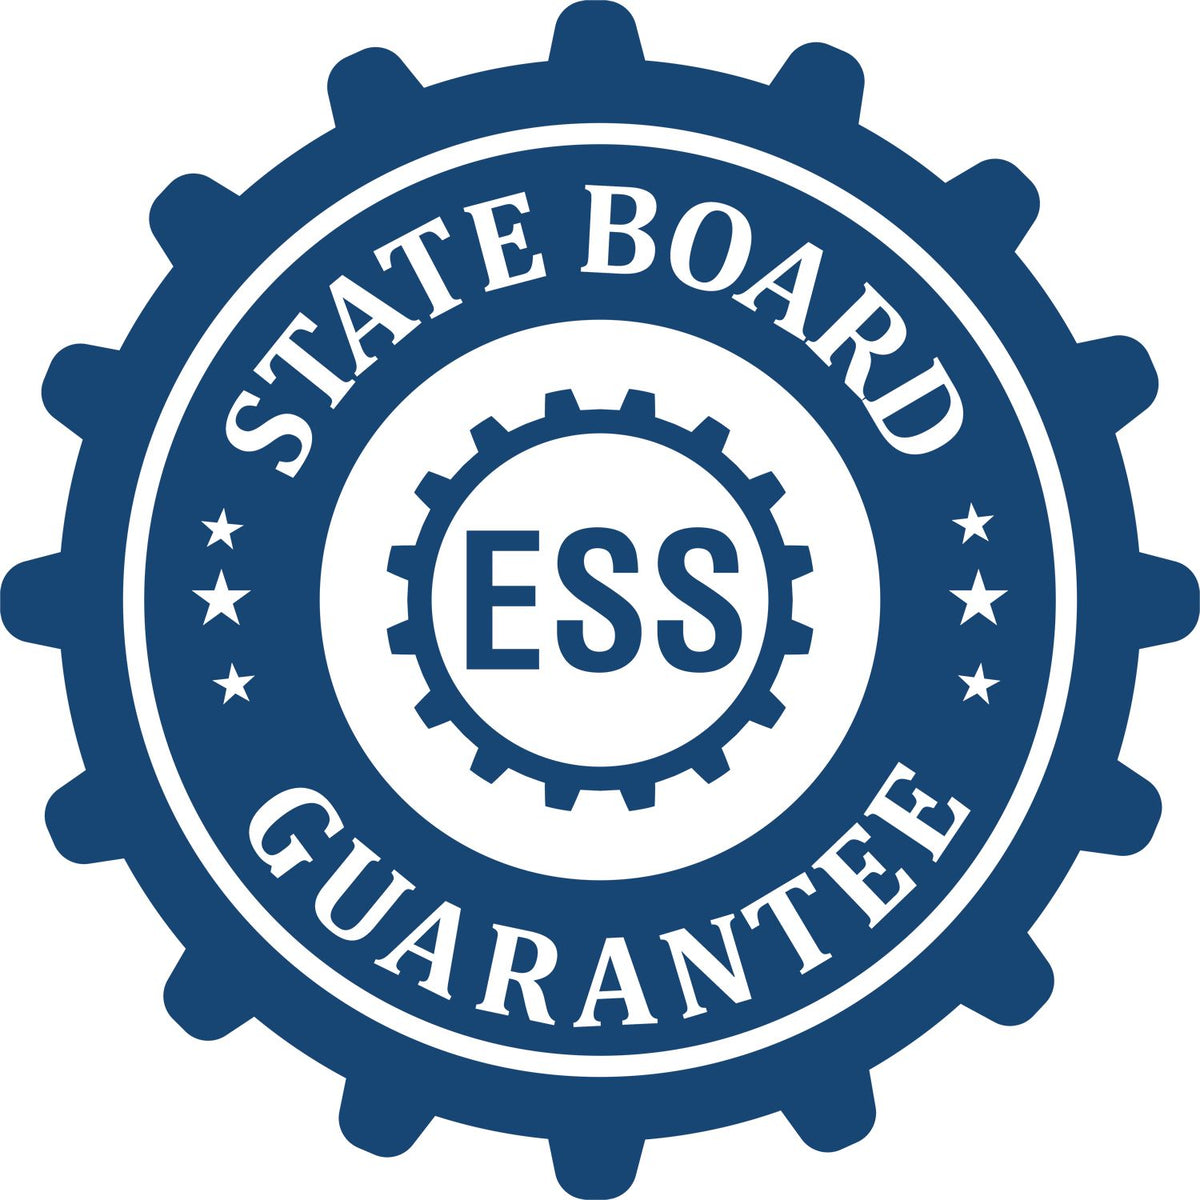 An emblem in a gear shape illustrating a state board guarantee for the Premium MaxLight Pre-Inked Georgia Landscape Architectural Stamp product.